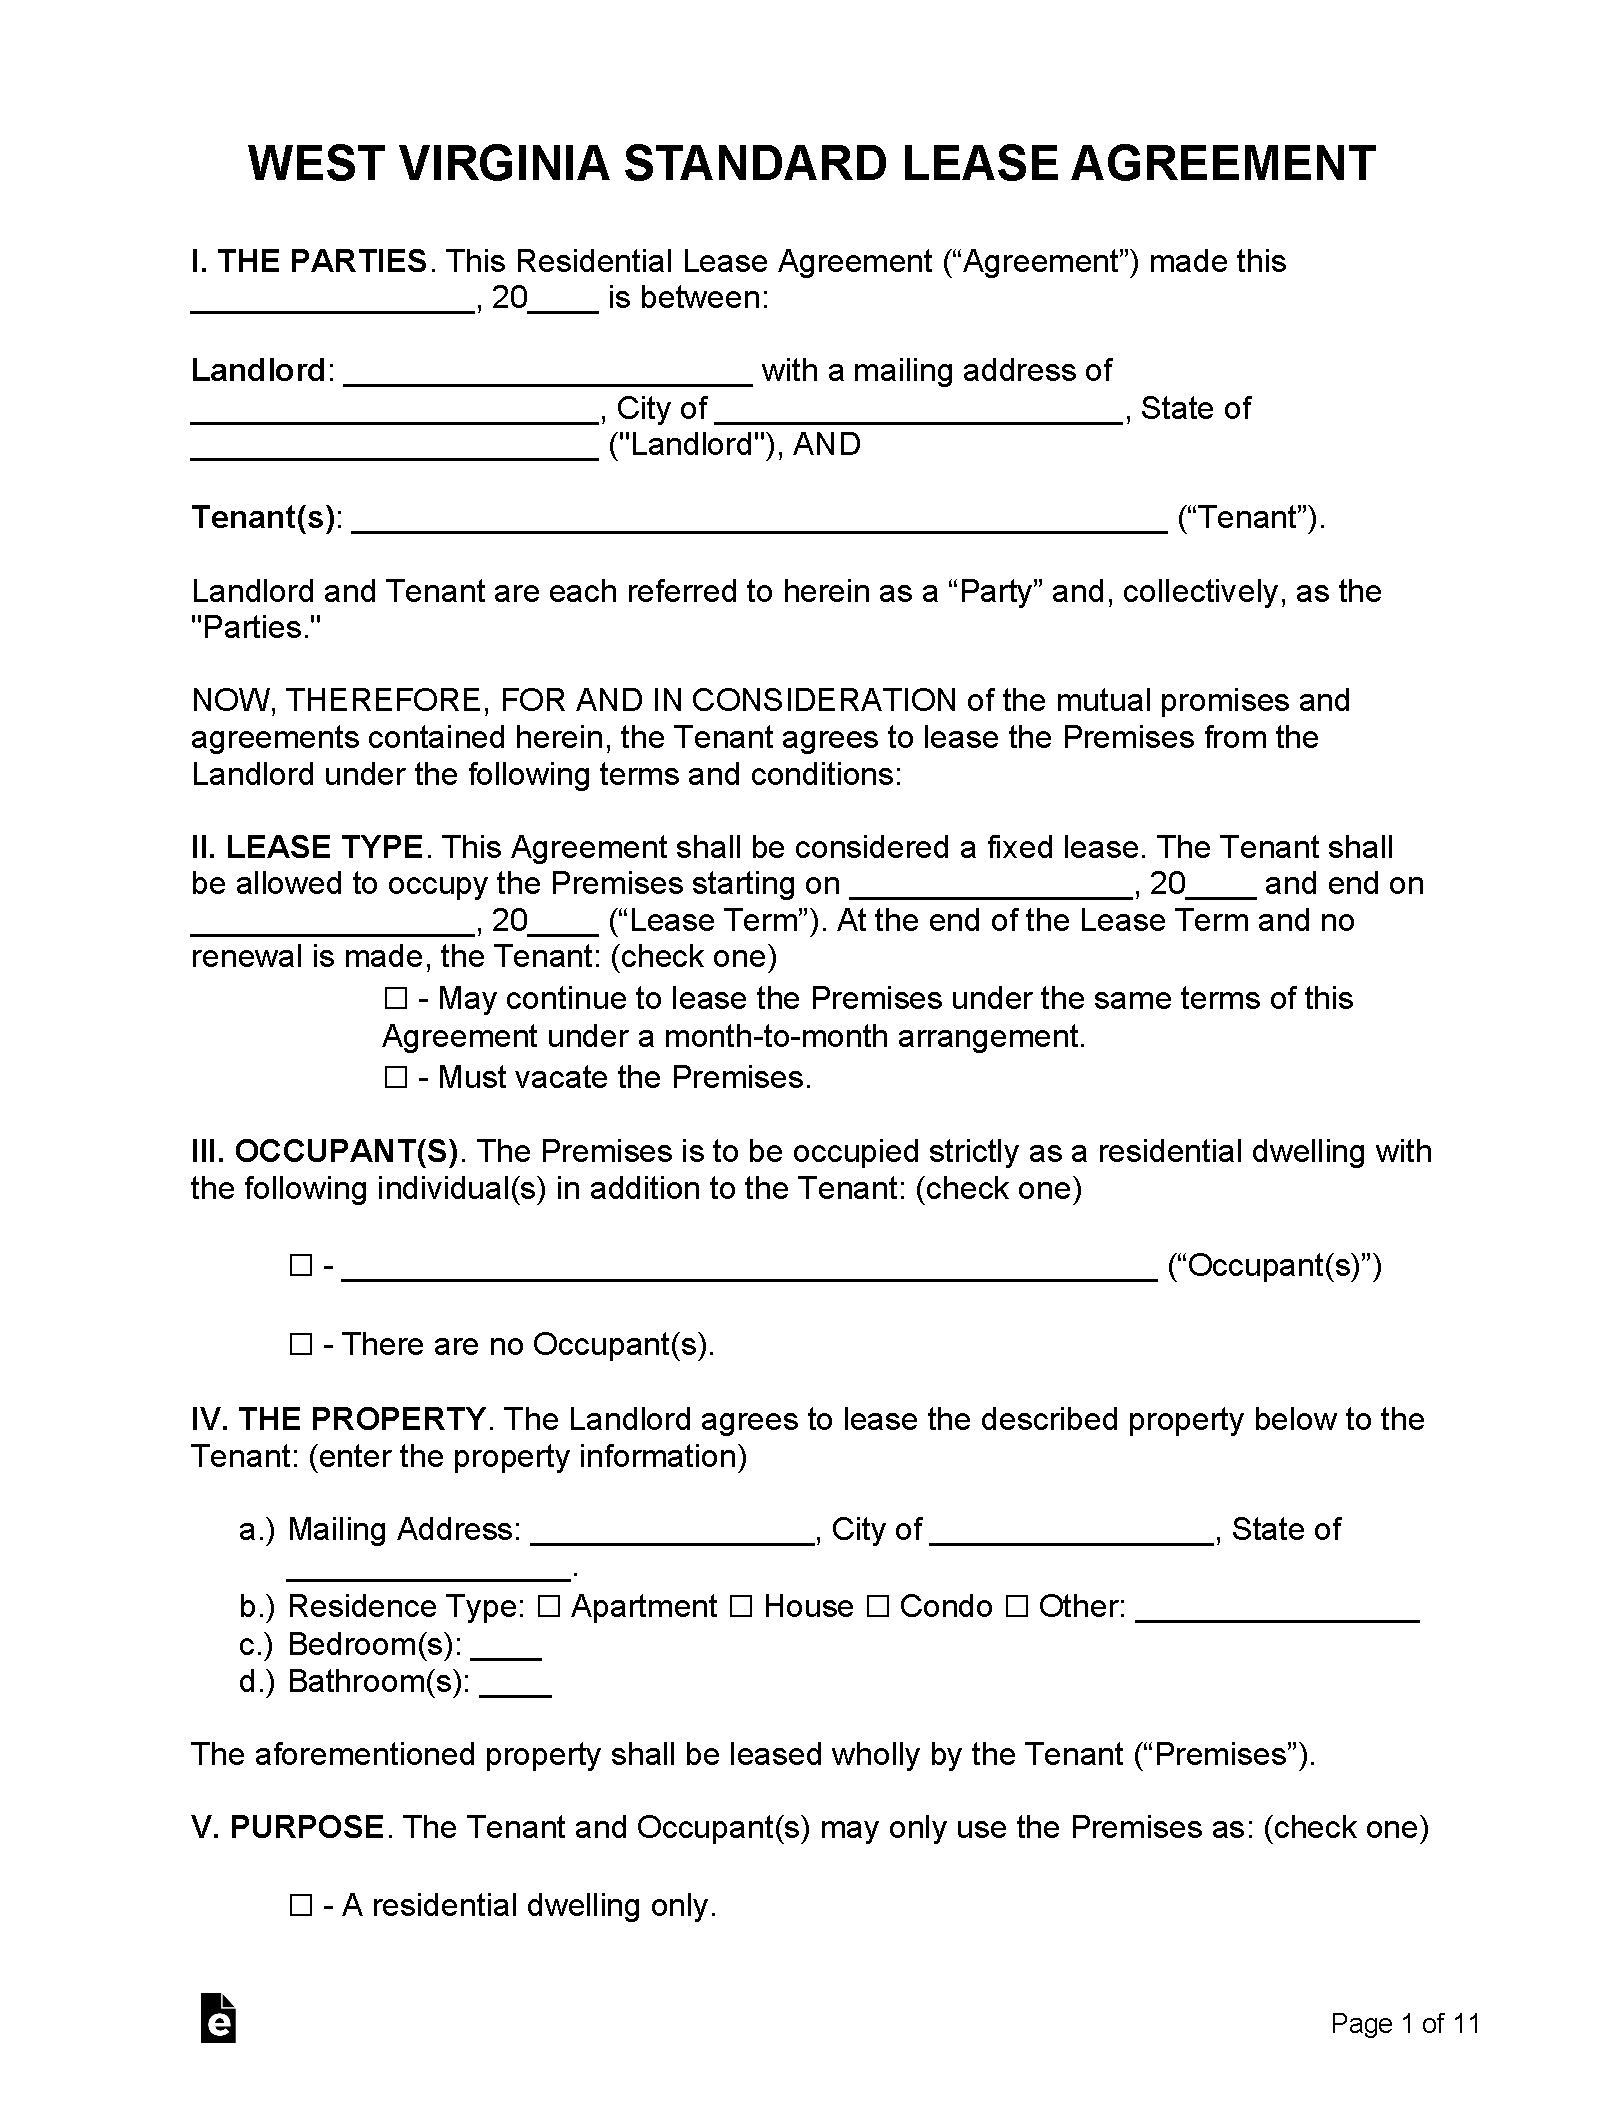 west-virginia-lease-agreement-templates-6